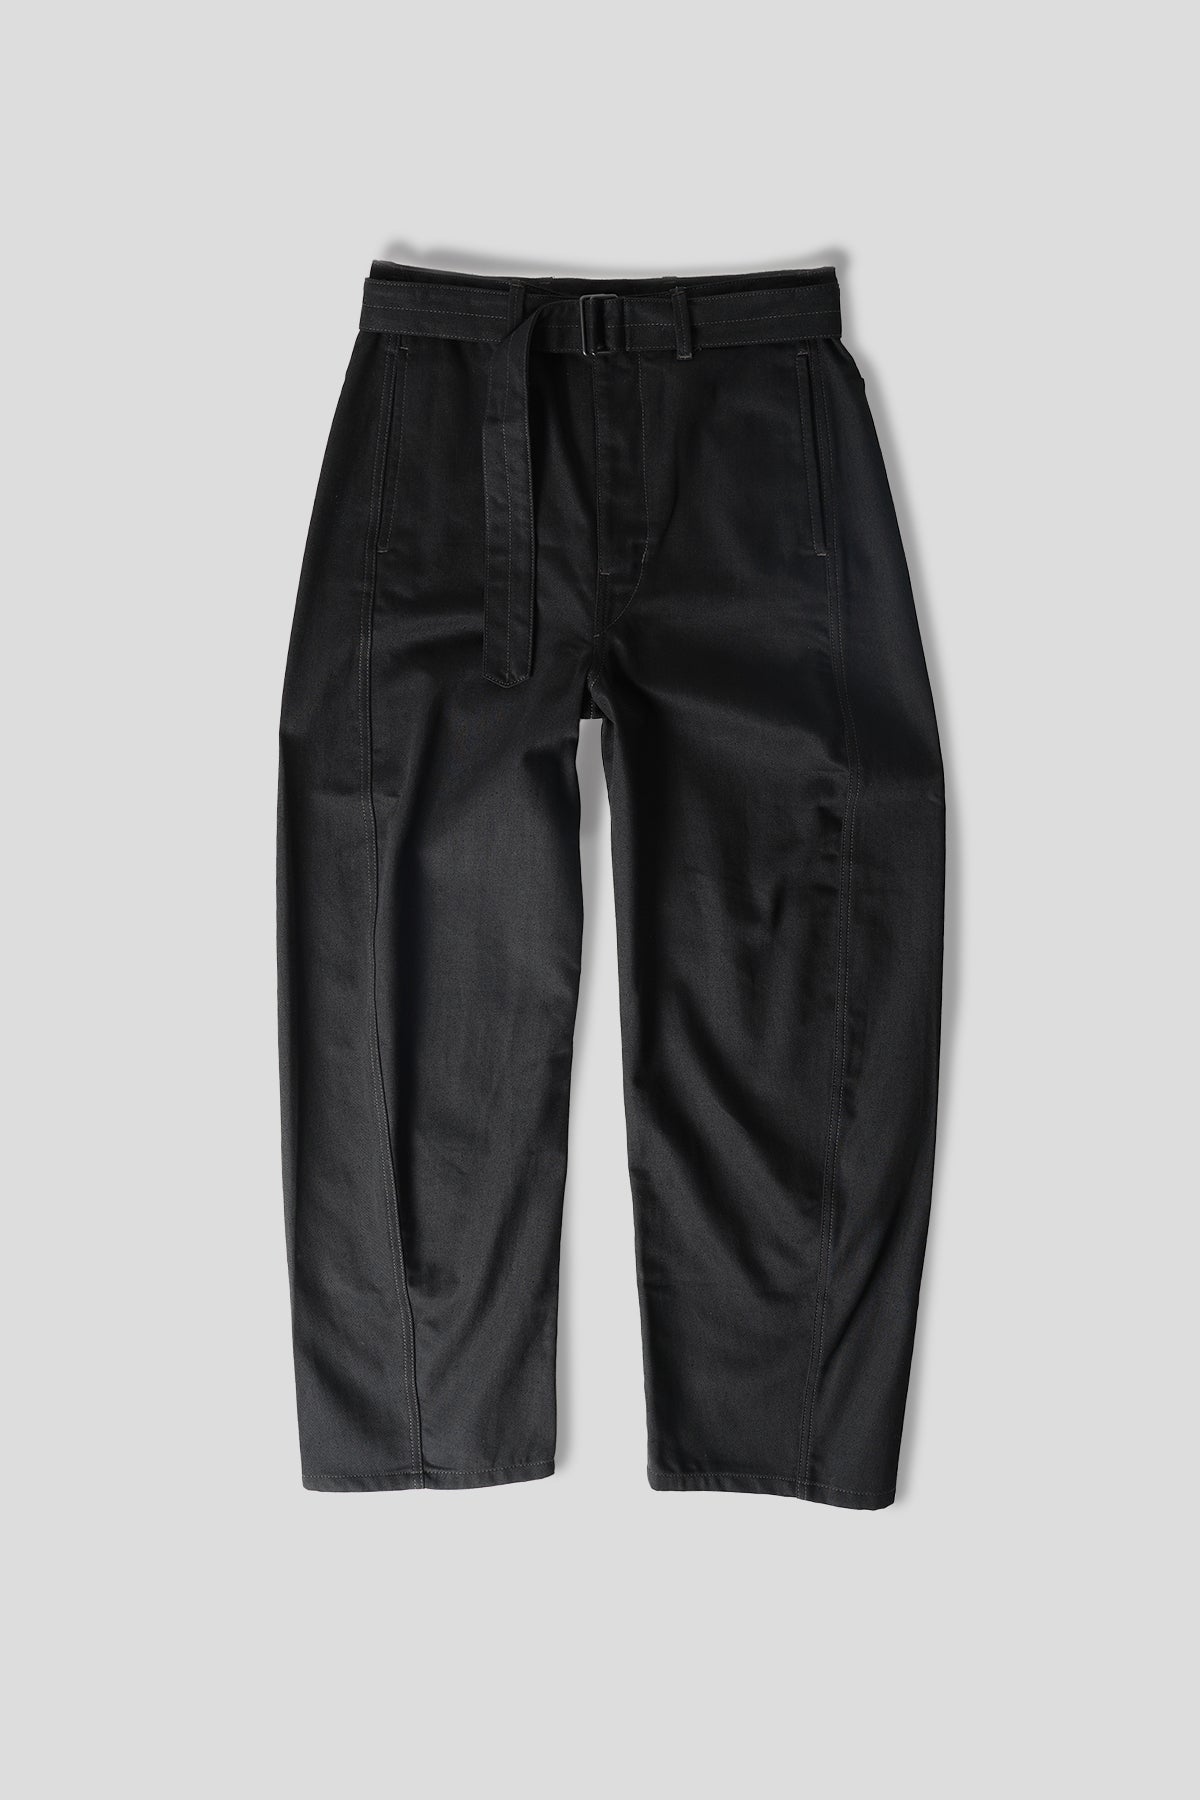 LEMAIRE - BLACK TWISTED BELTED TROUSERS